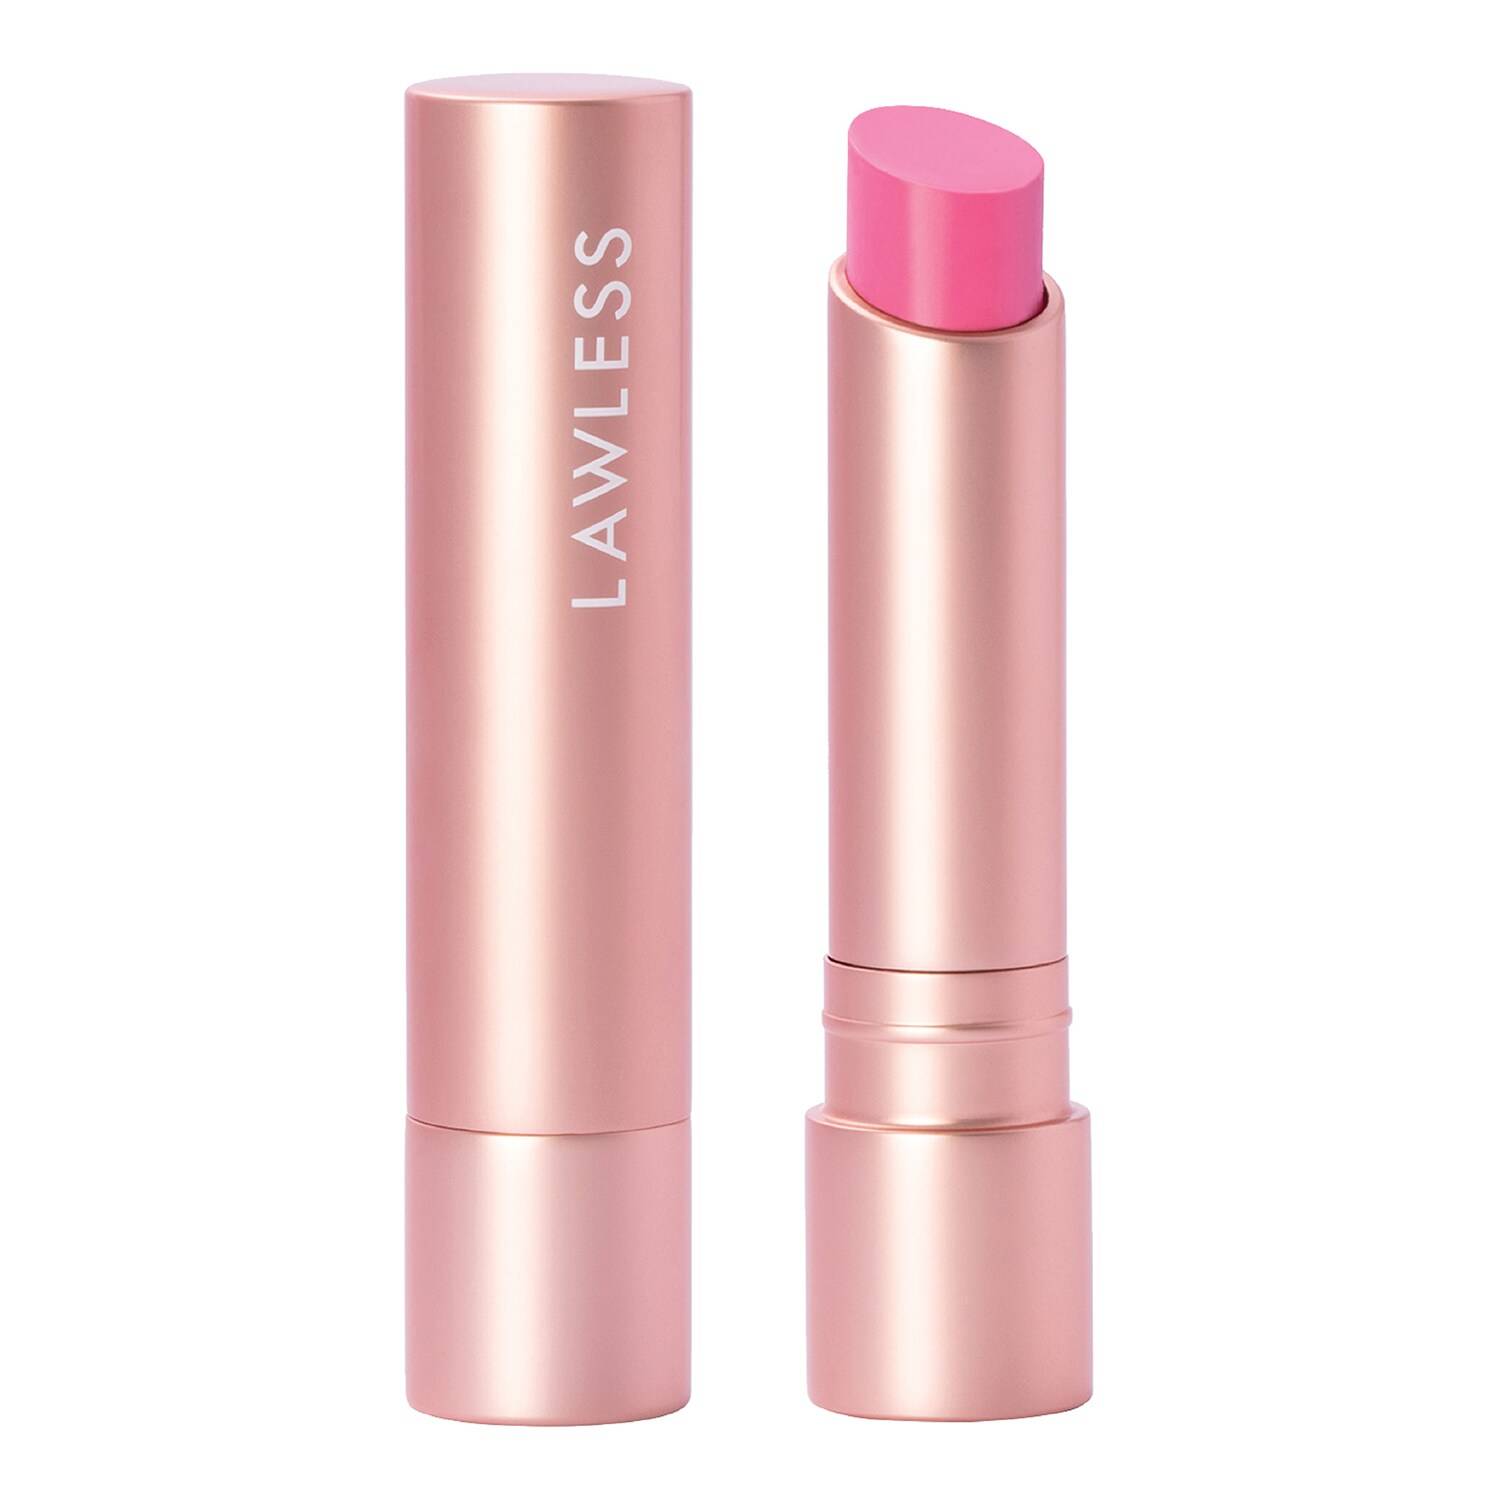 Lawless Beauty Forget The Filler Lip-Plumping Line-Smoothing Tinted Lip Balm 2.9G Baby Doll